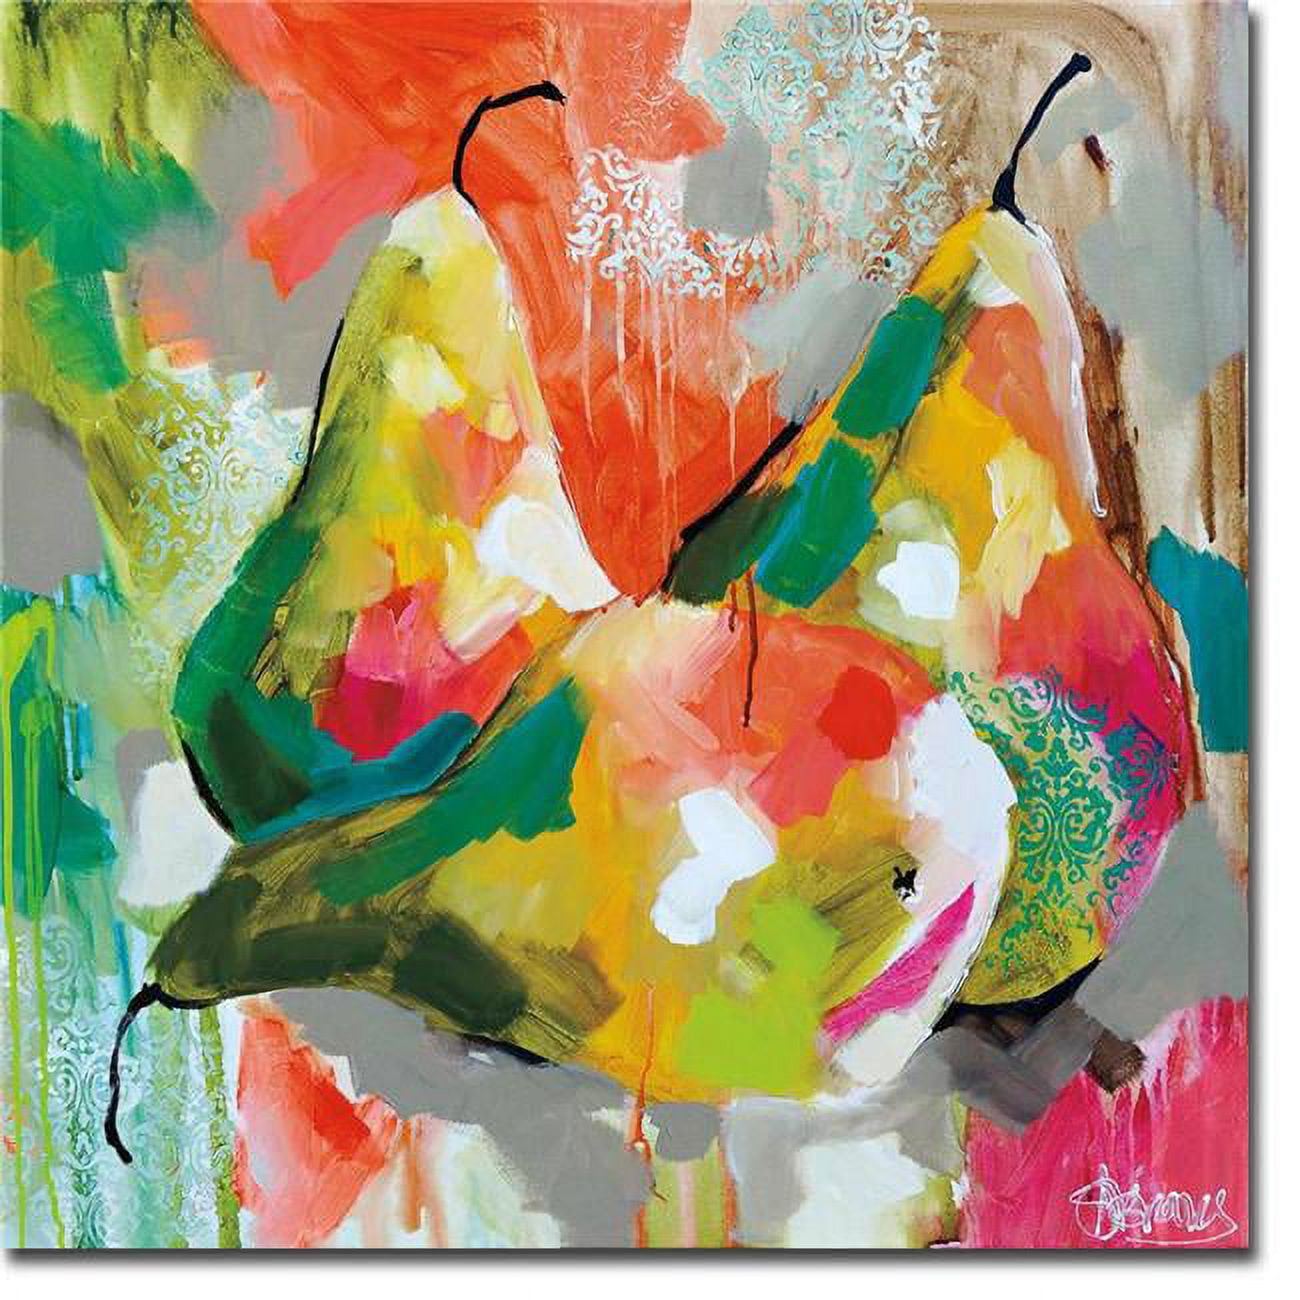 1212q279cg Sunlit Pears By Amanda Brooks Premium Gallery-wrapped Canvas Giclee Art - 12 X 12 X 1.5 In.